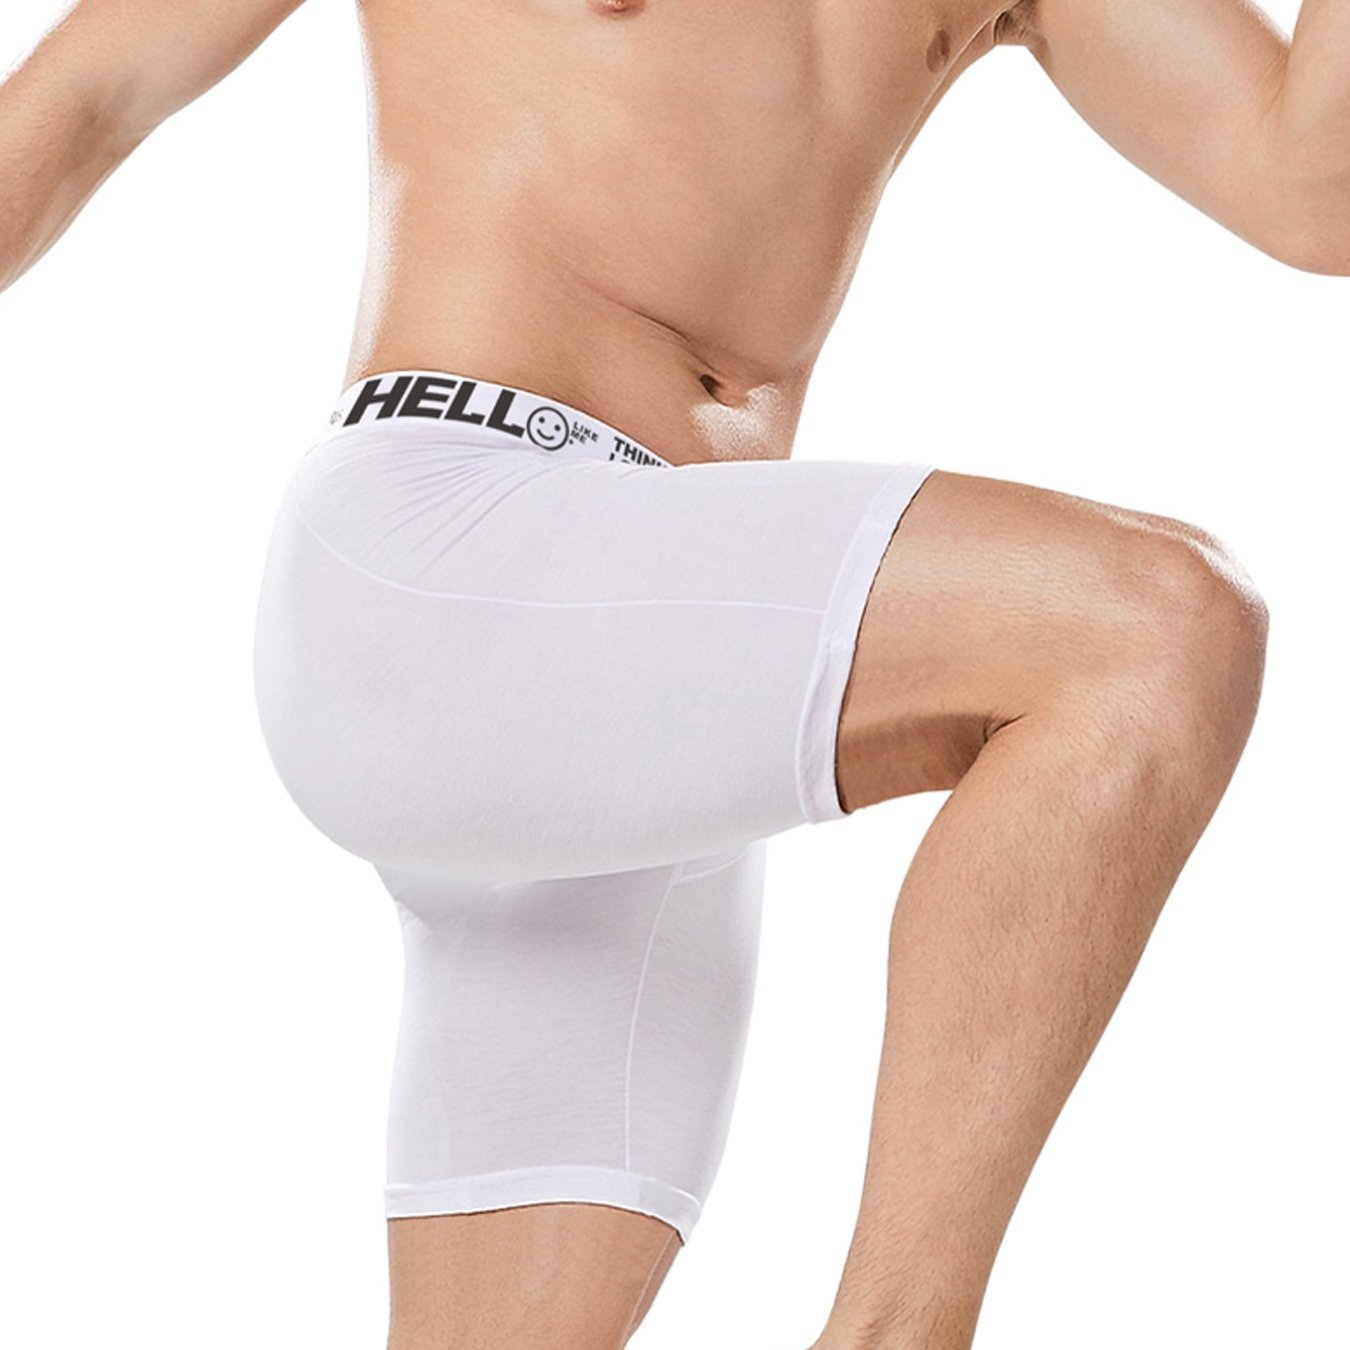 Poomer on X: Poomer Premium Clubman Briefs makes you chill this